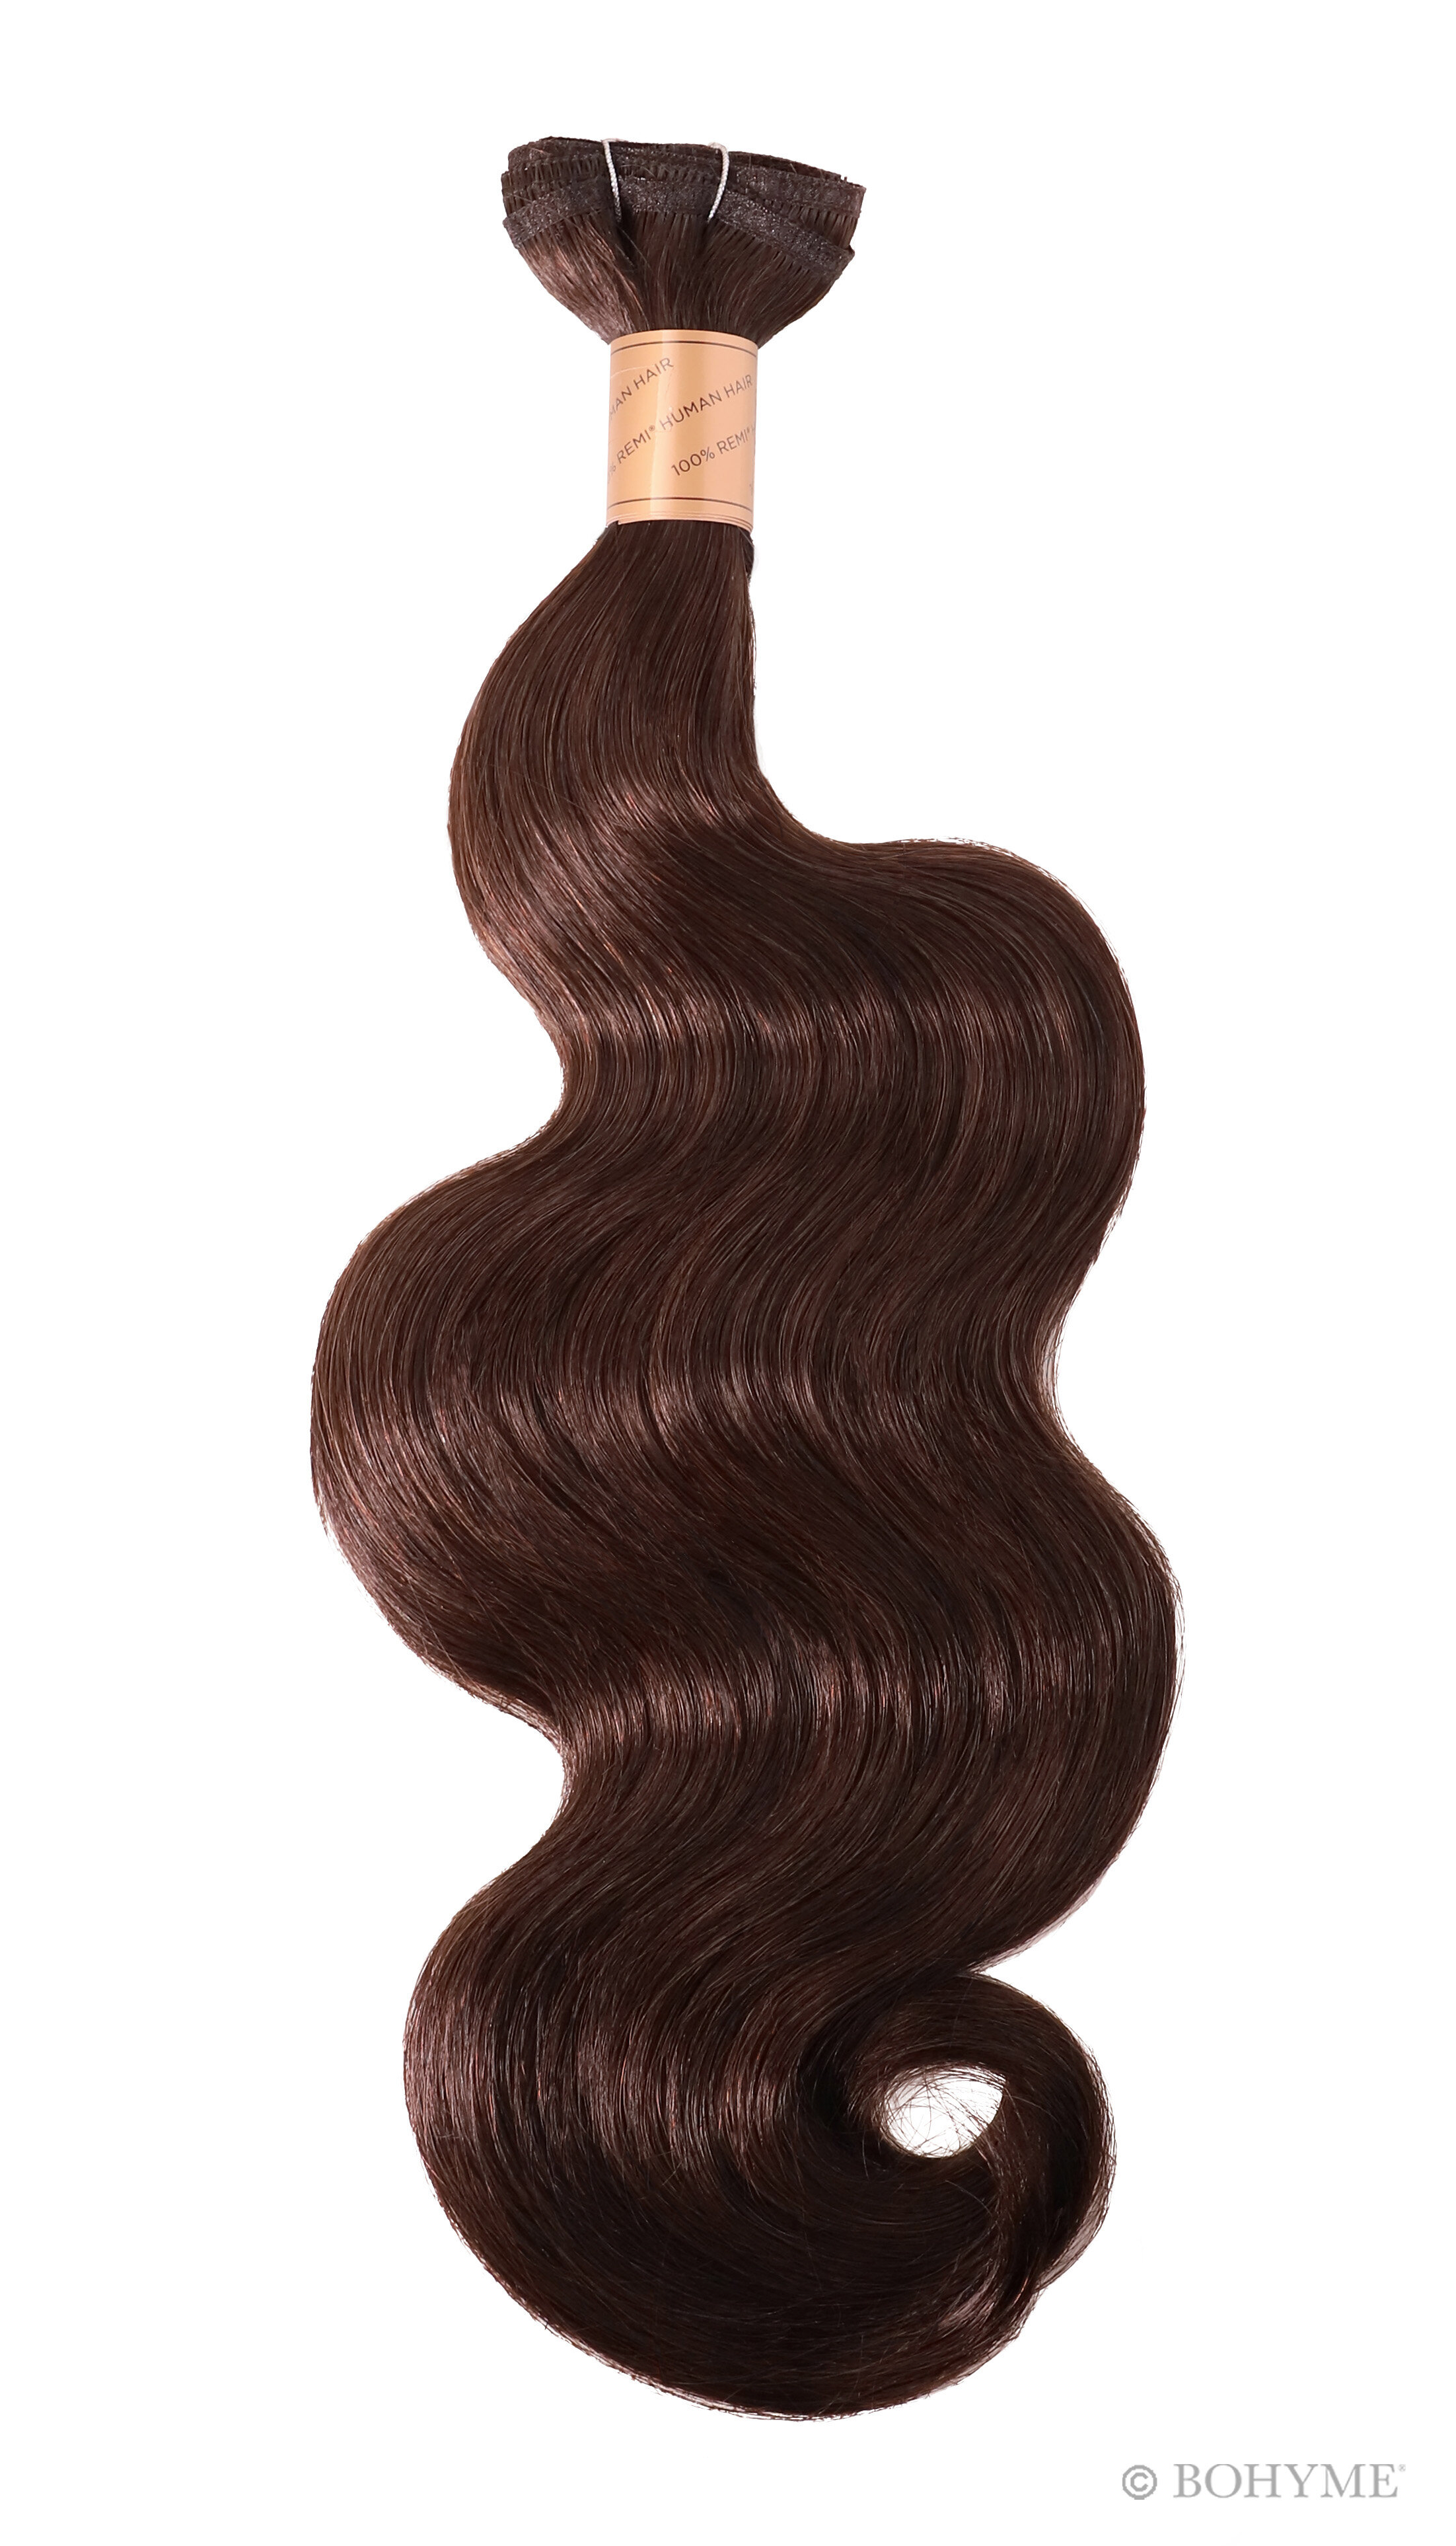 Luxe Seamless Body Wave on white ©.jpg